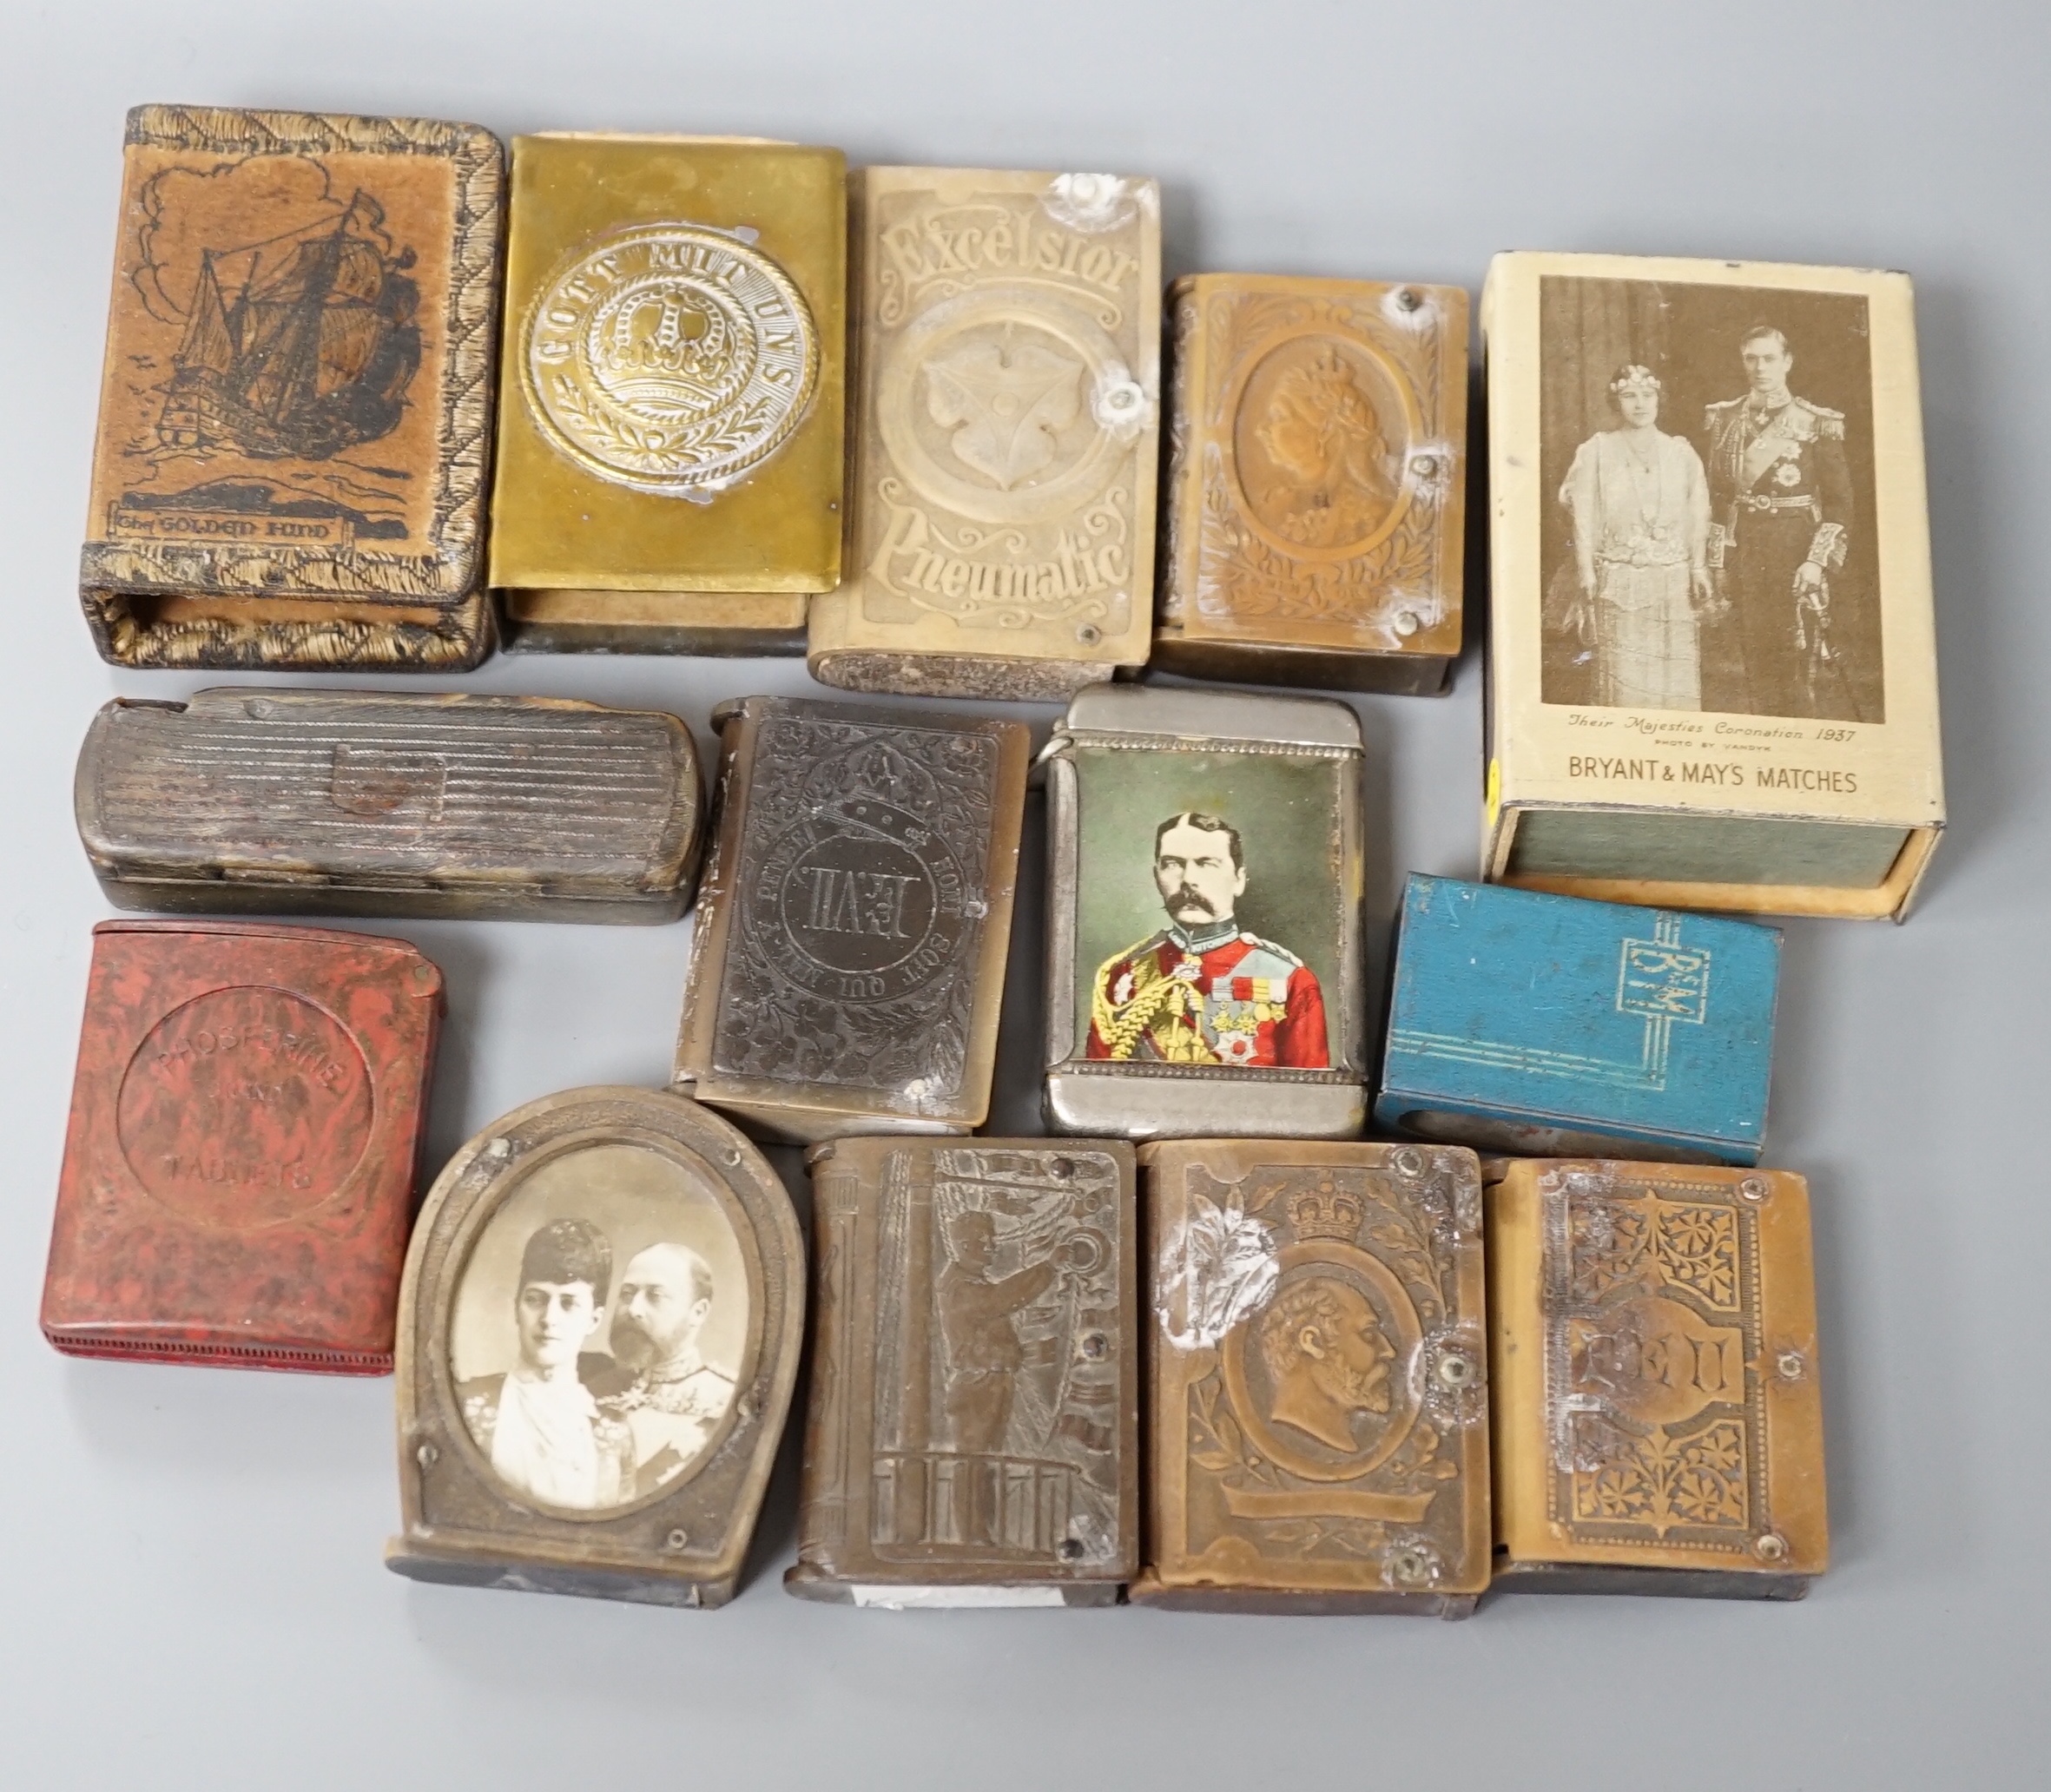 A collection of Victorian and later vestas and matchbox holders, some commemorative